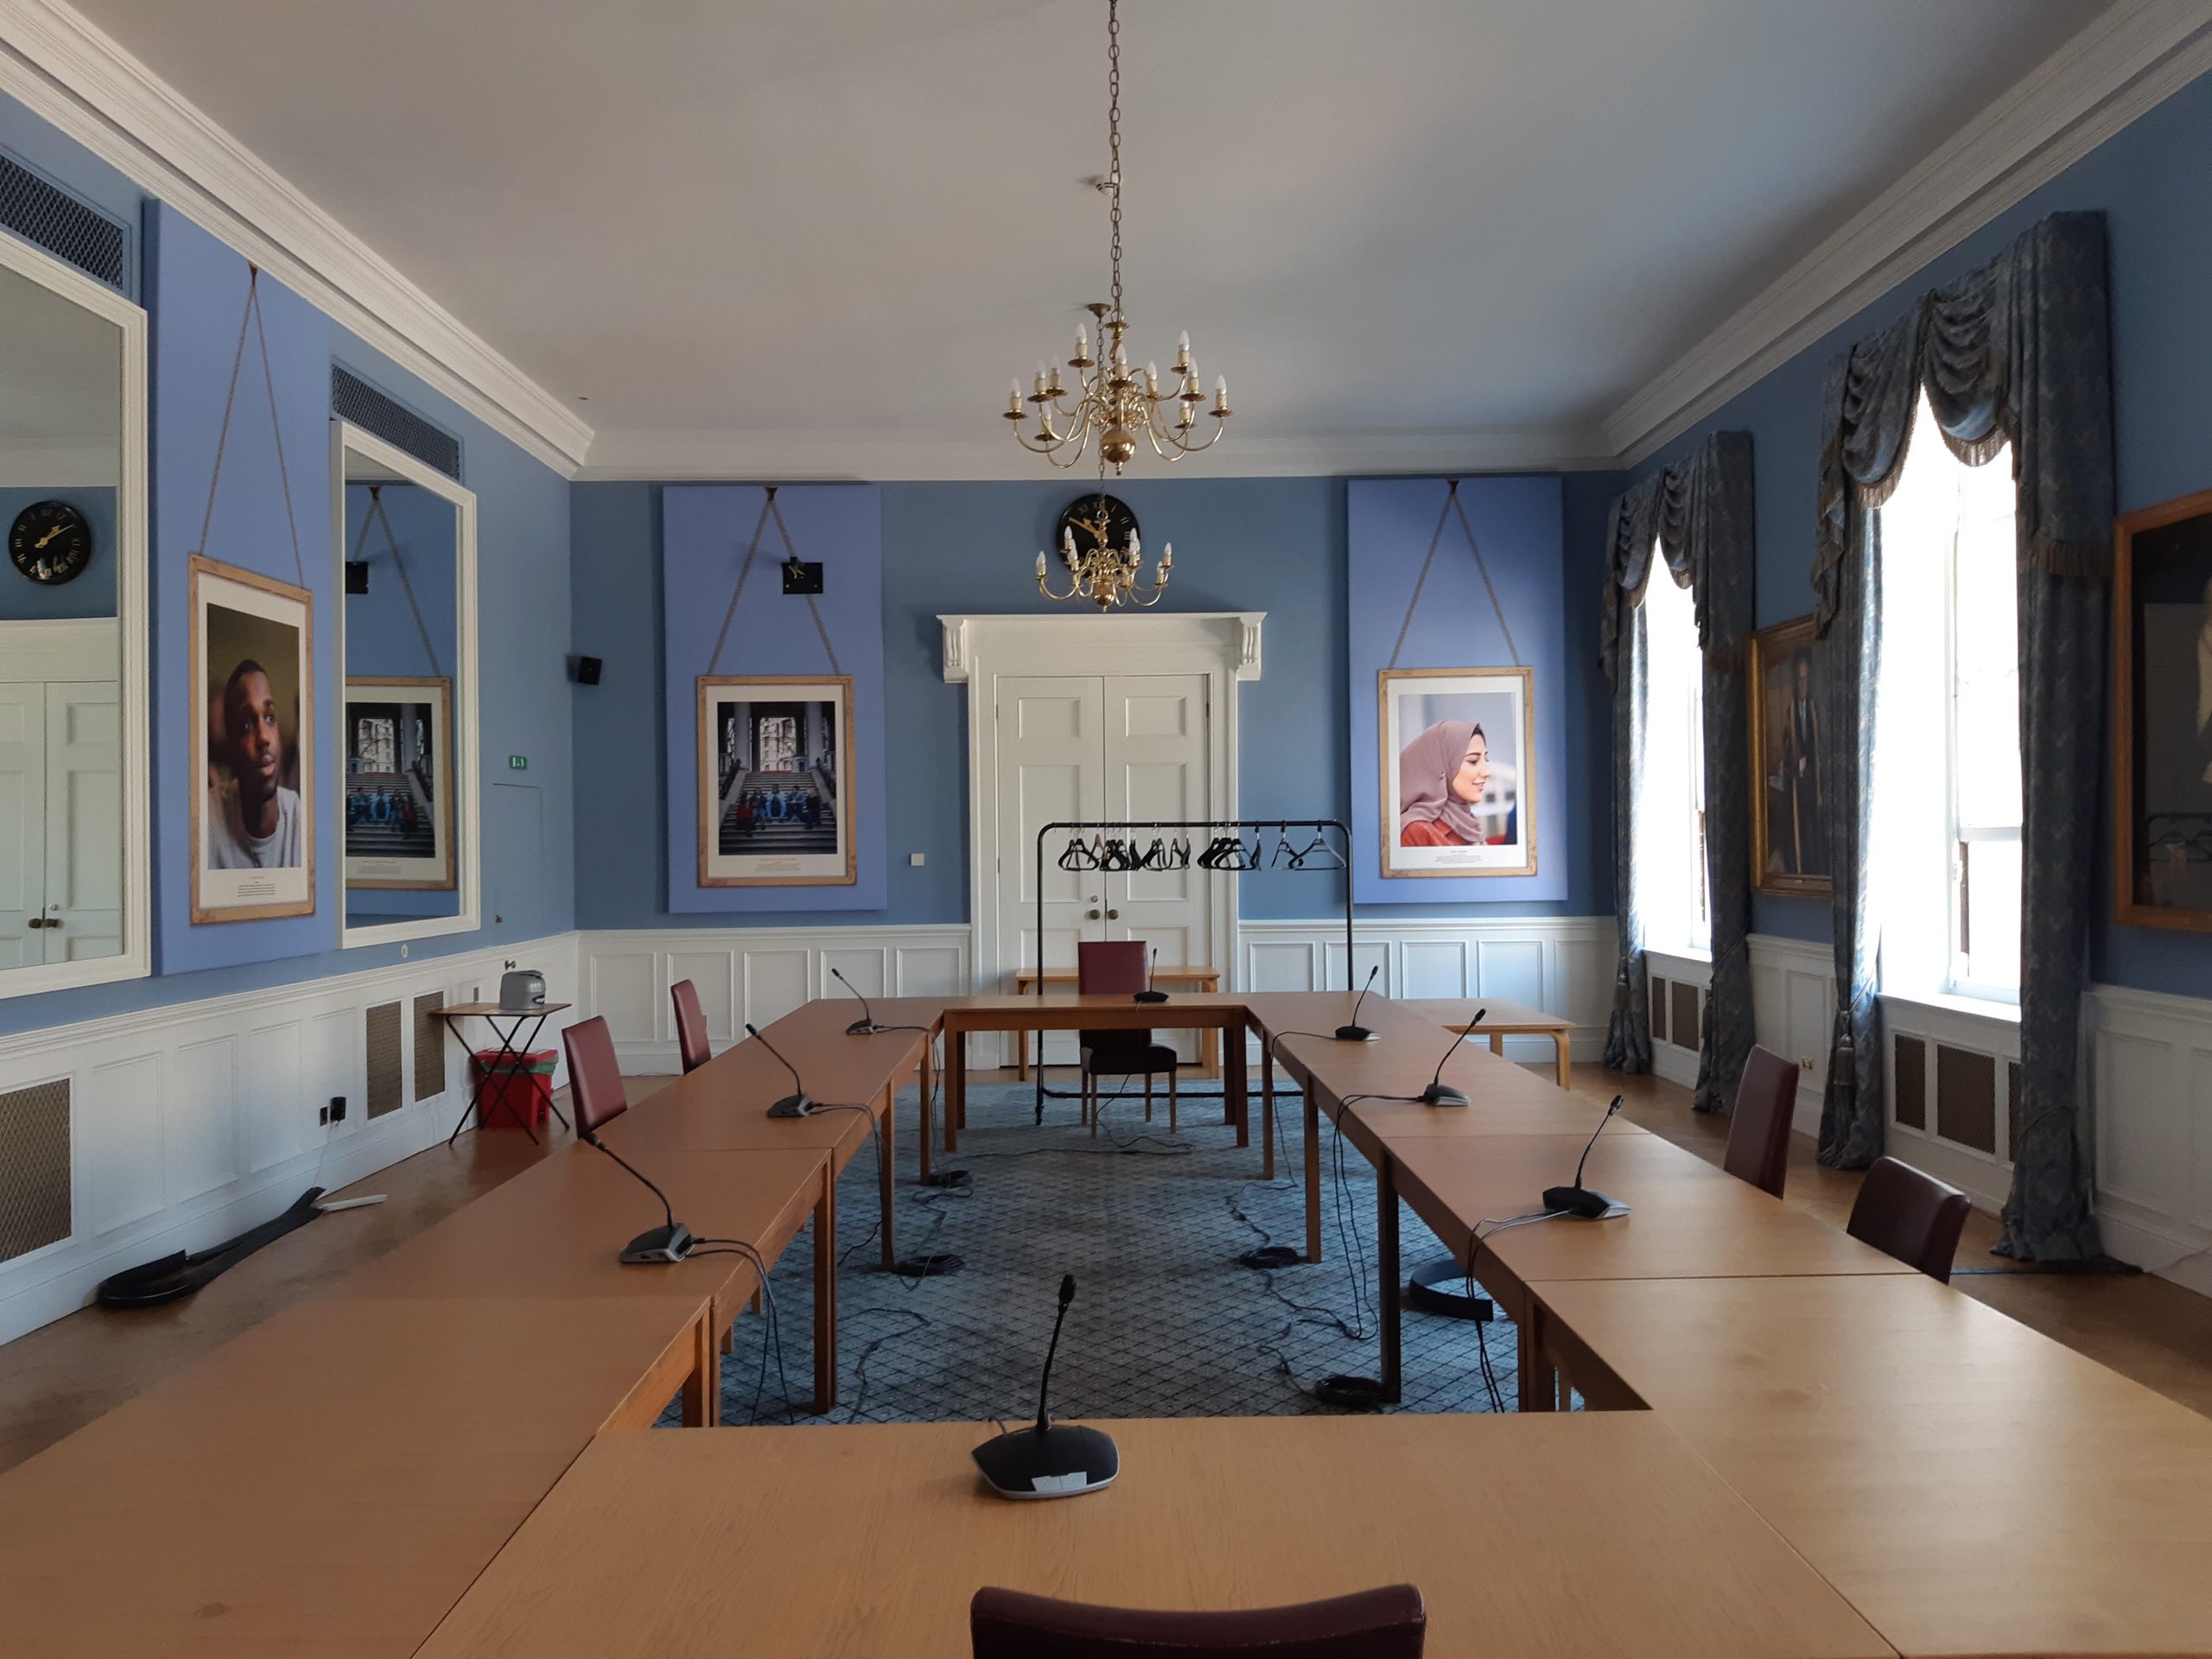 Image of the council room set up for a committee meeting.